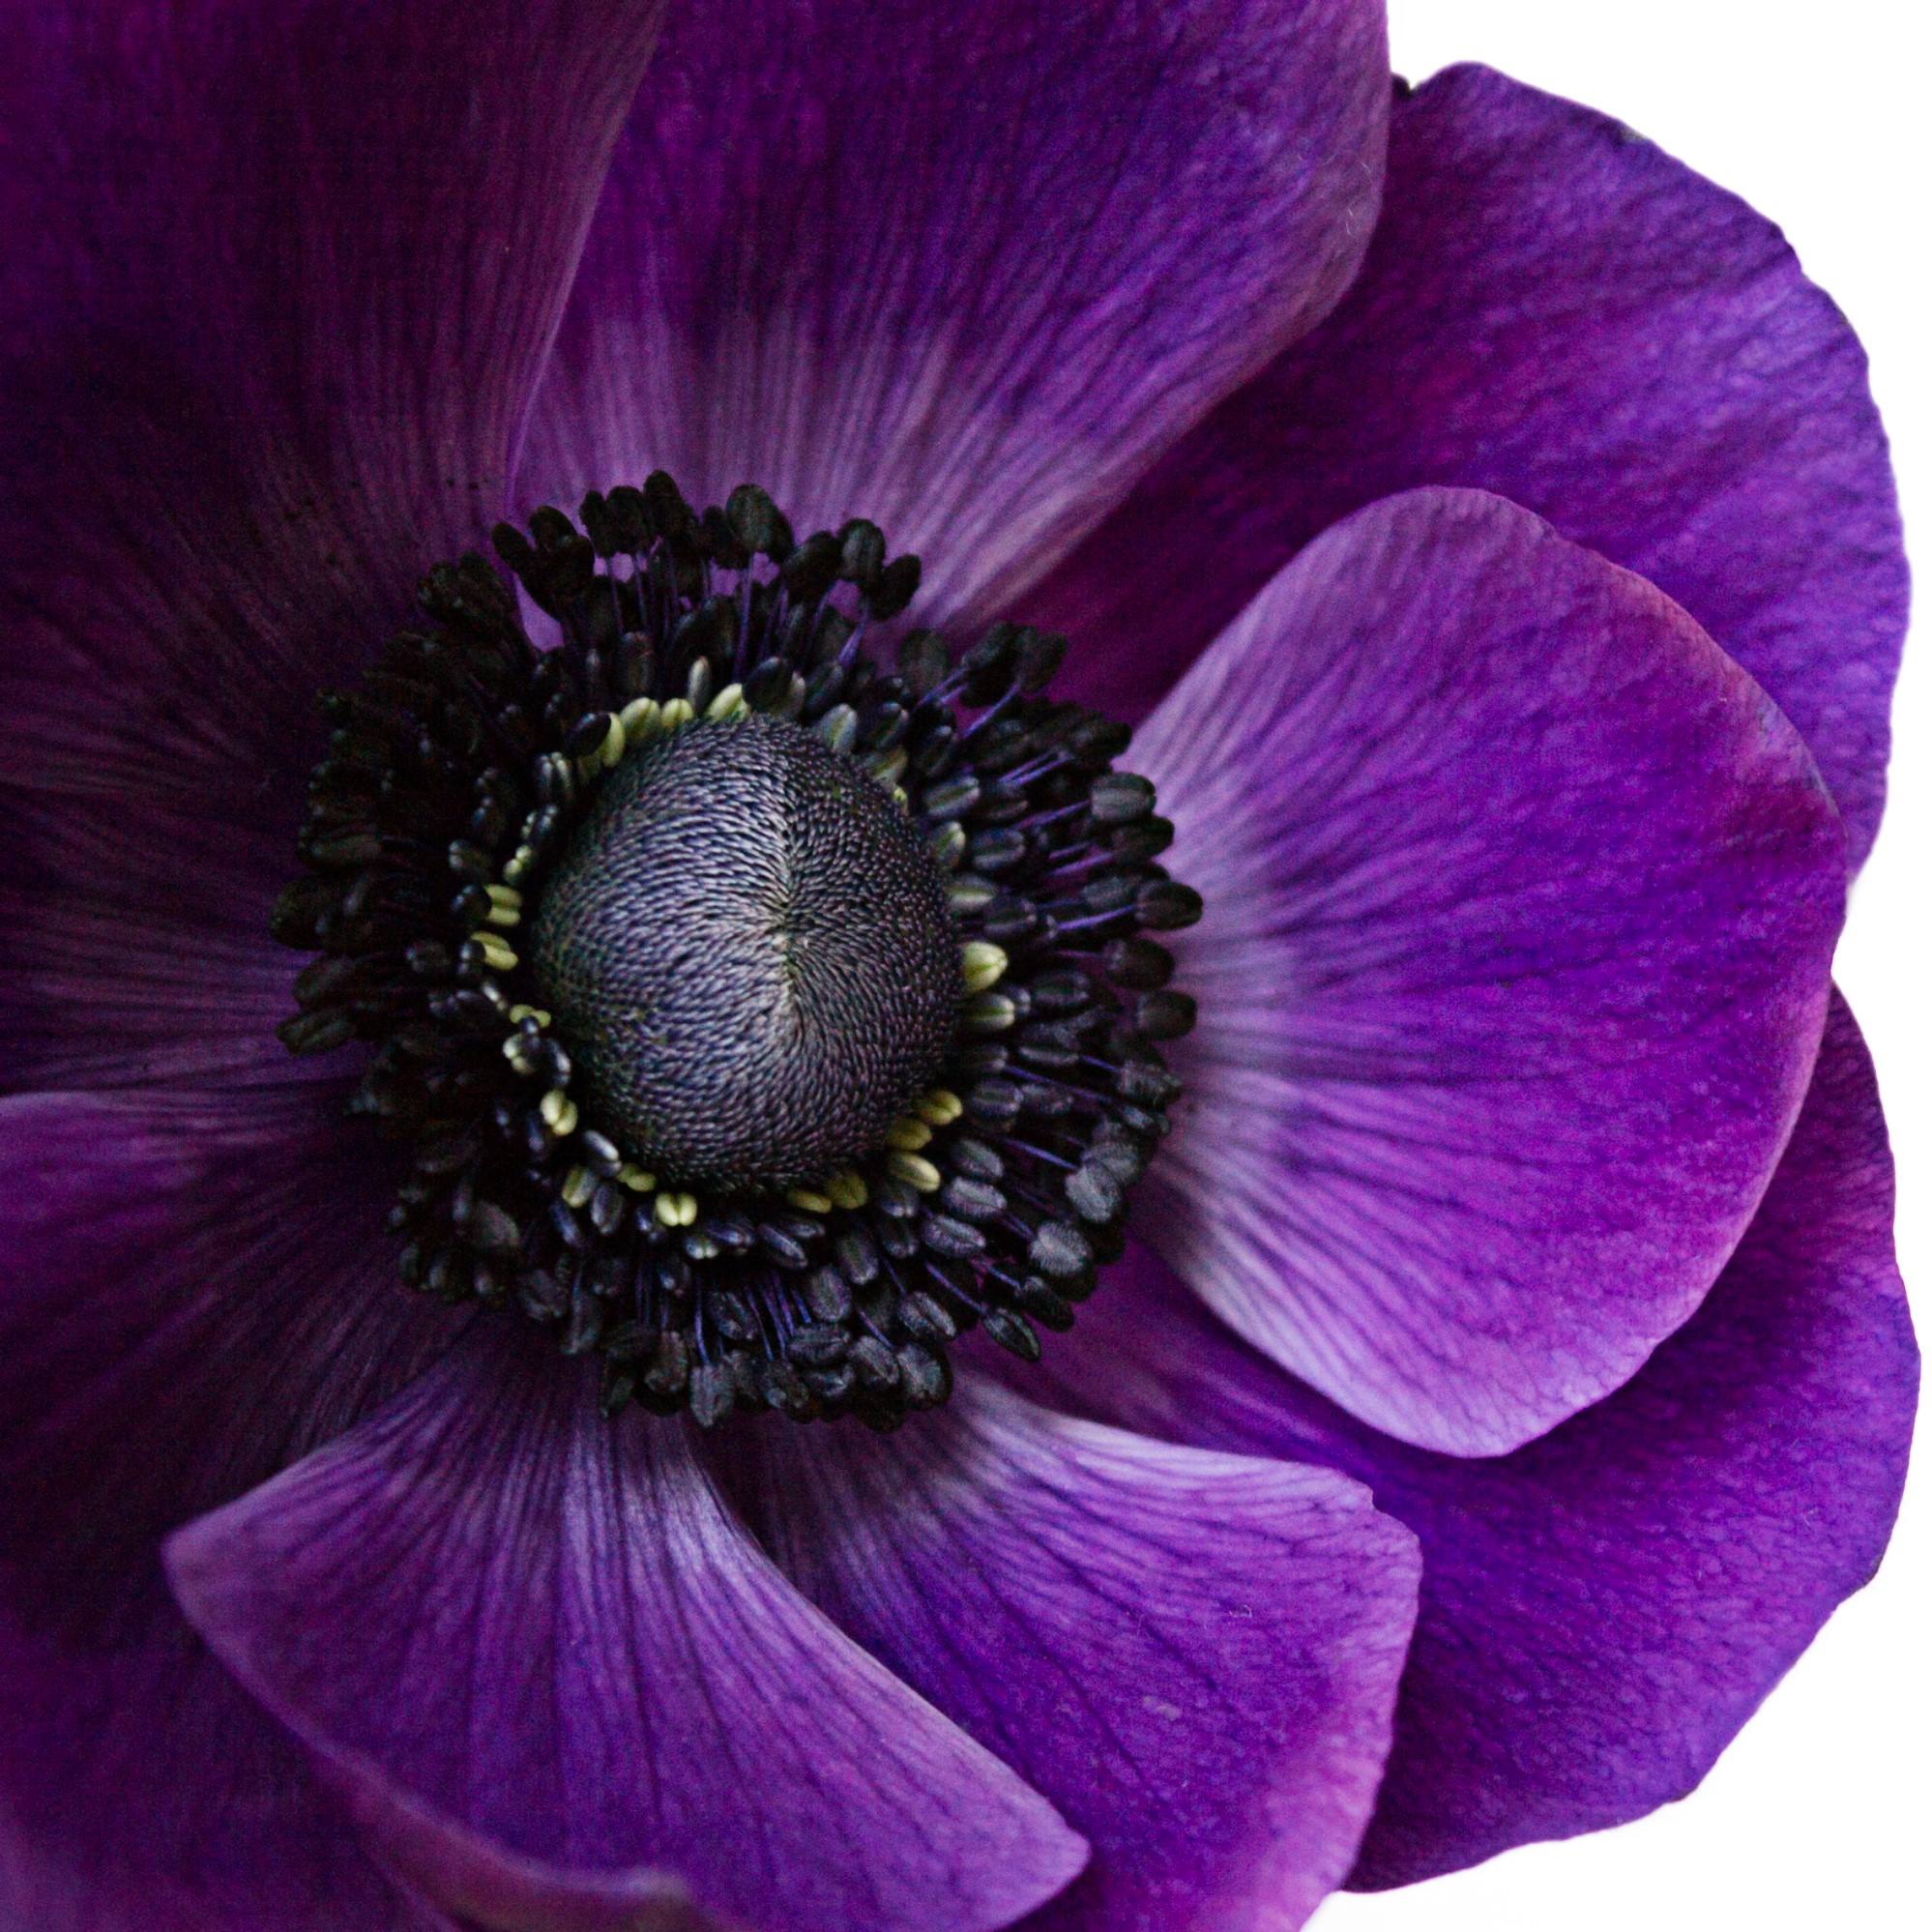 Anemone is such a beautiful shade of purple don't you agree